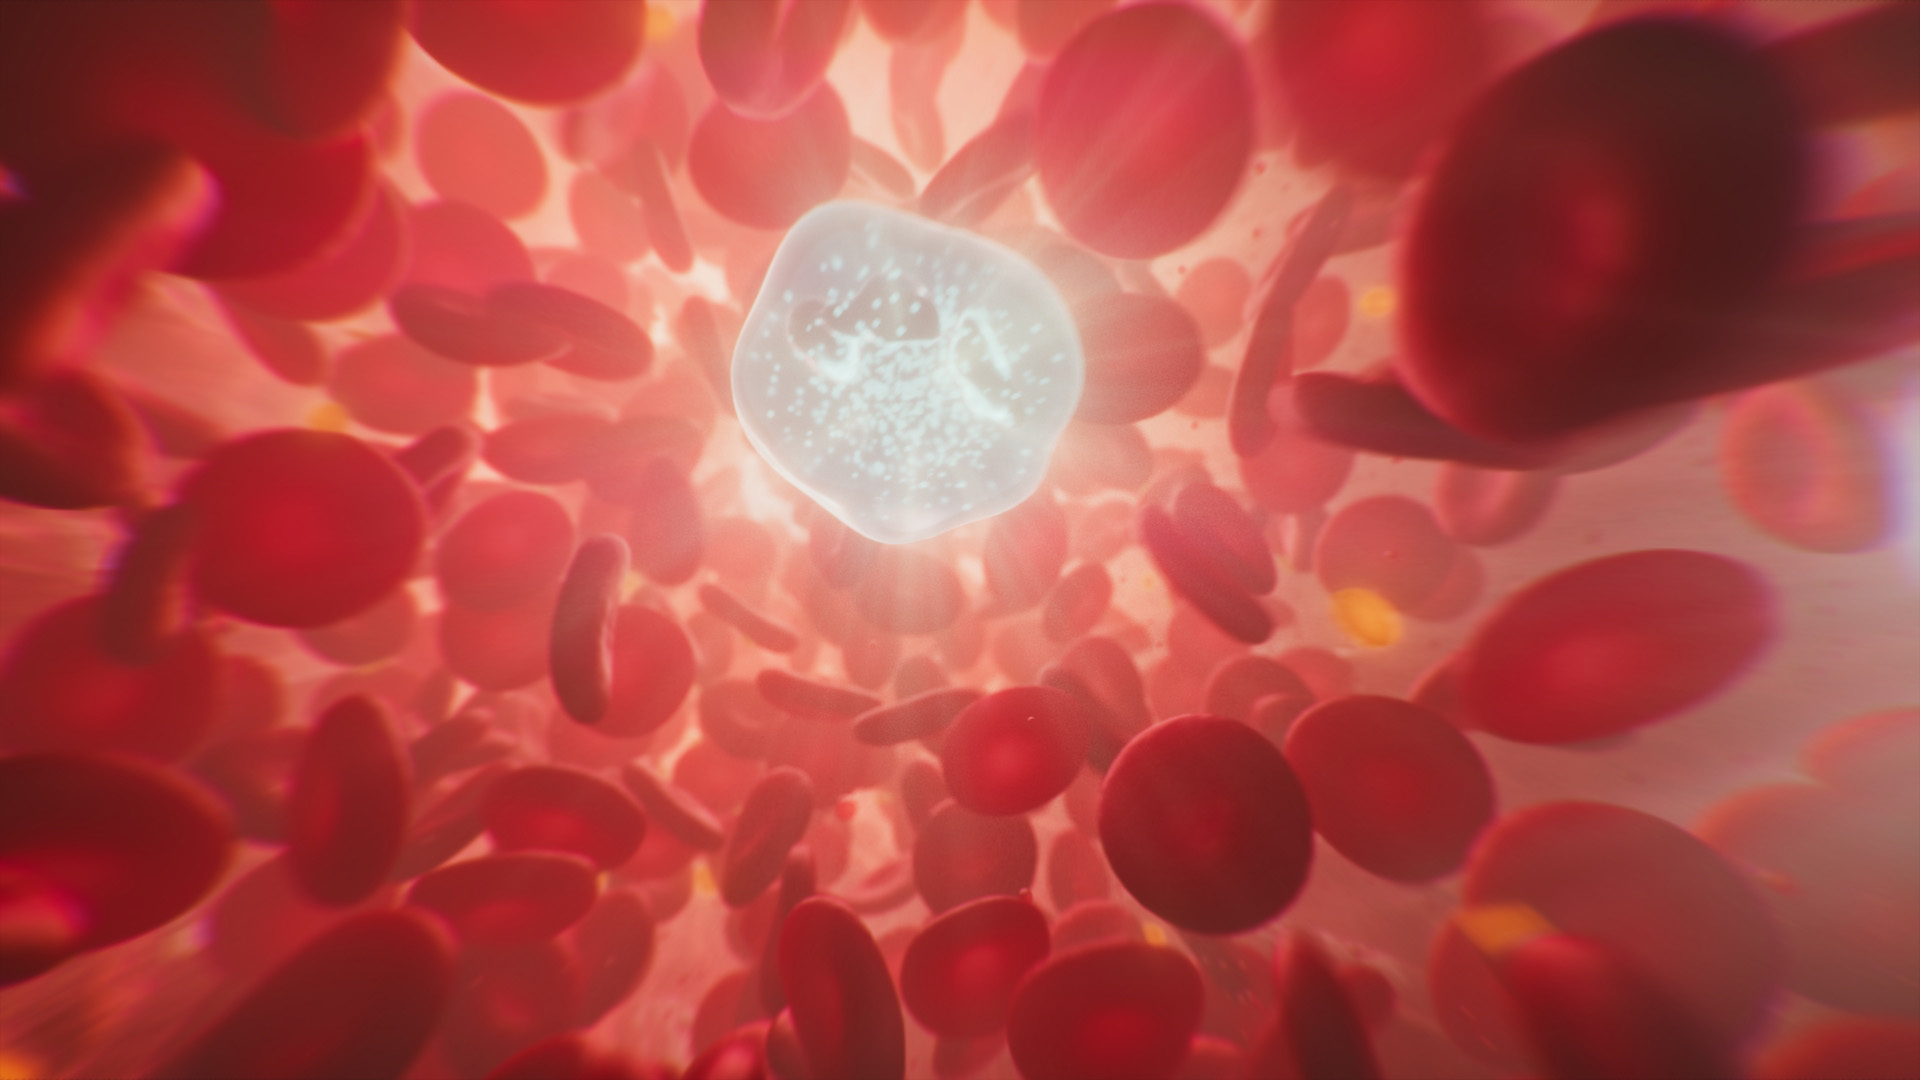 CG rendered animation: Many red blood cells pass by the camera, which is inside a blood vessel. Other blood components, such as white blood cells (neutrophils) and platalets are also present. The movement is rhythmically in time with a heart beat, audible in the background. The cells speed up and slow down, but never stop moving.